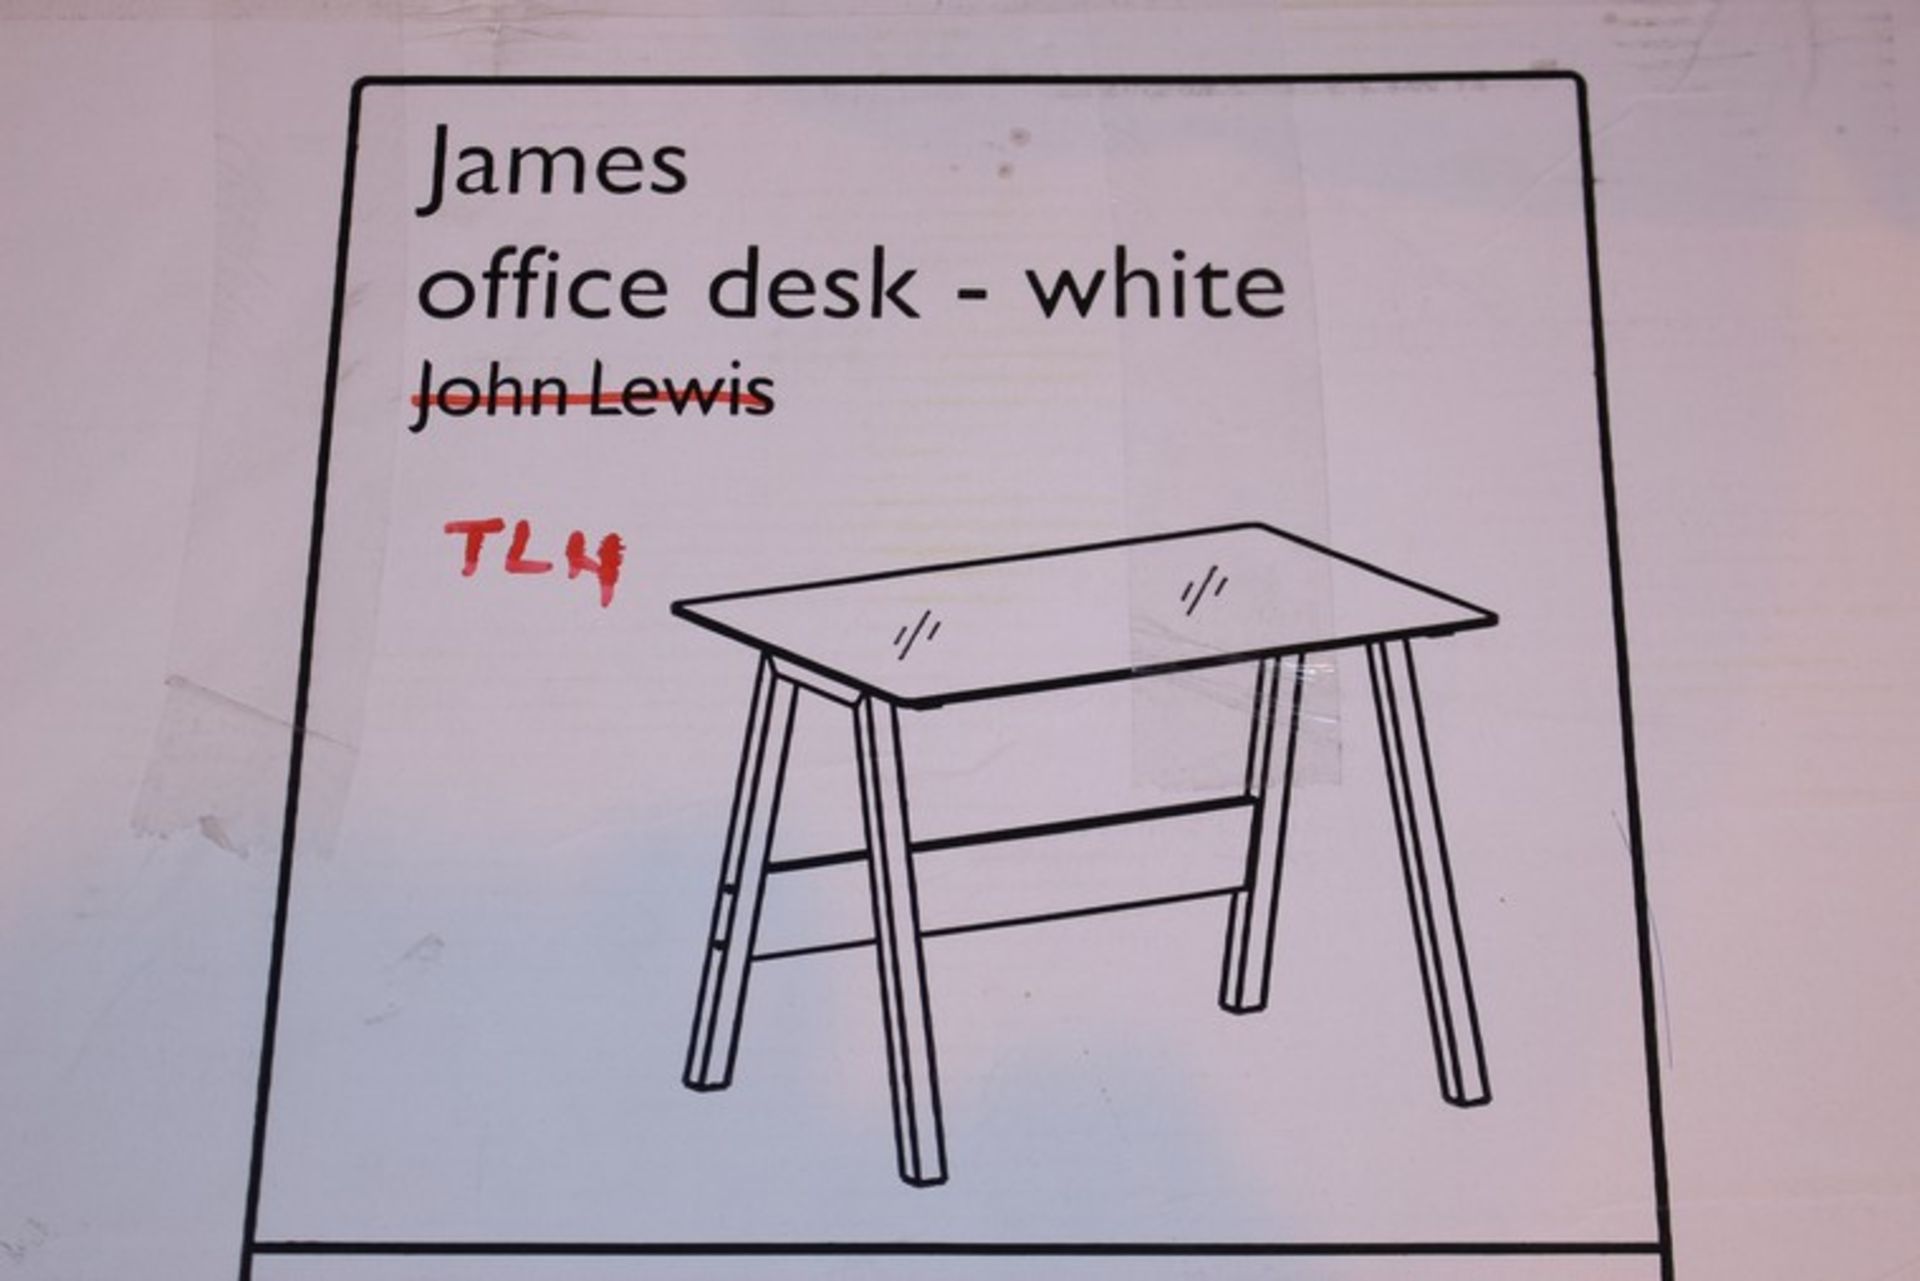 1 x JAMES OFFICE DESK IN WHITE (02.01.18) (2578354) *PLEASE NOTE THAT THE BID PRICE IS MULTIPLIED BY